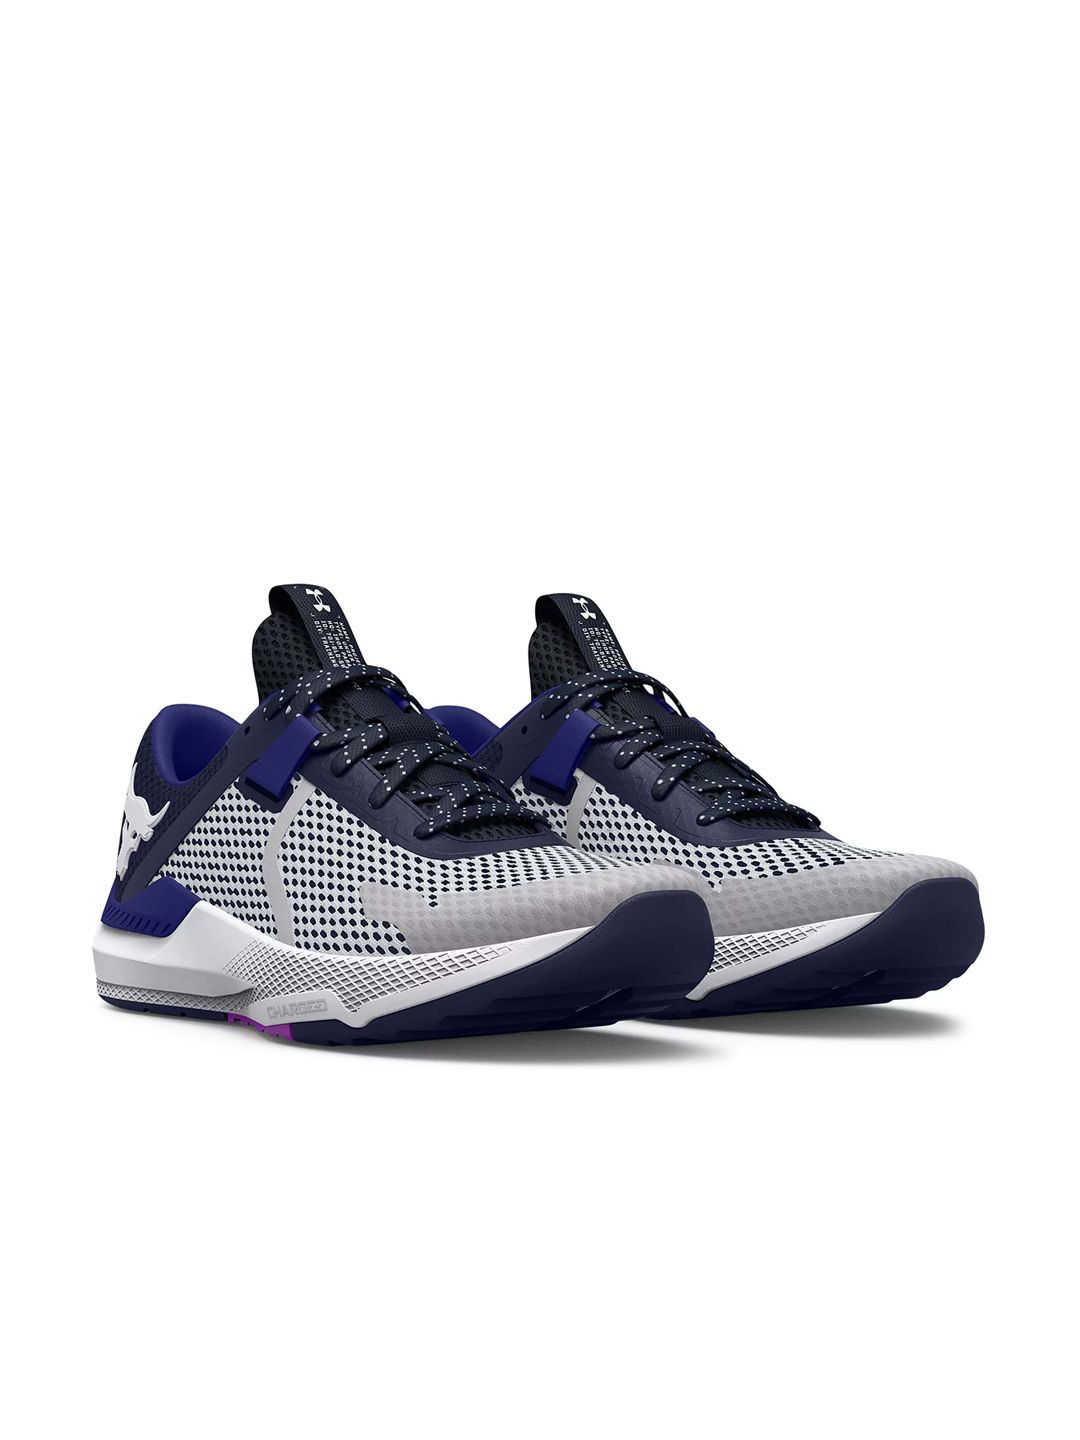 UNDER ARMOUR Unisex Woven Design Project Rock BSR 2 Training Shoes Price in India